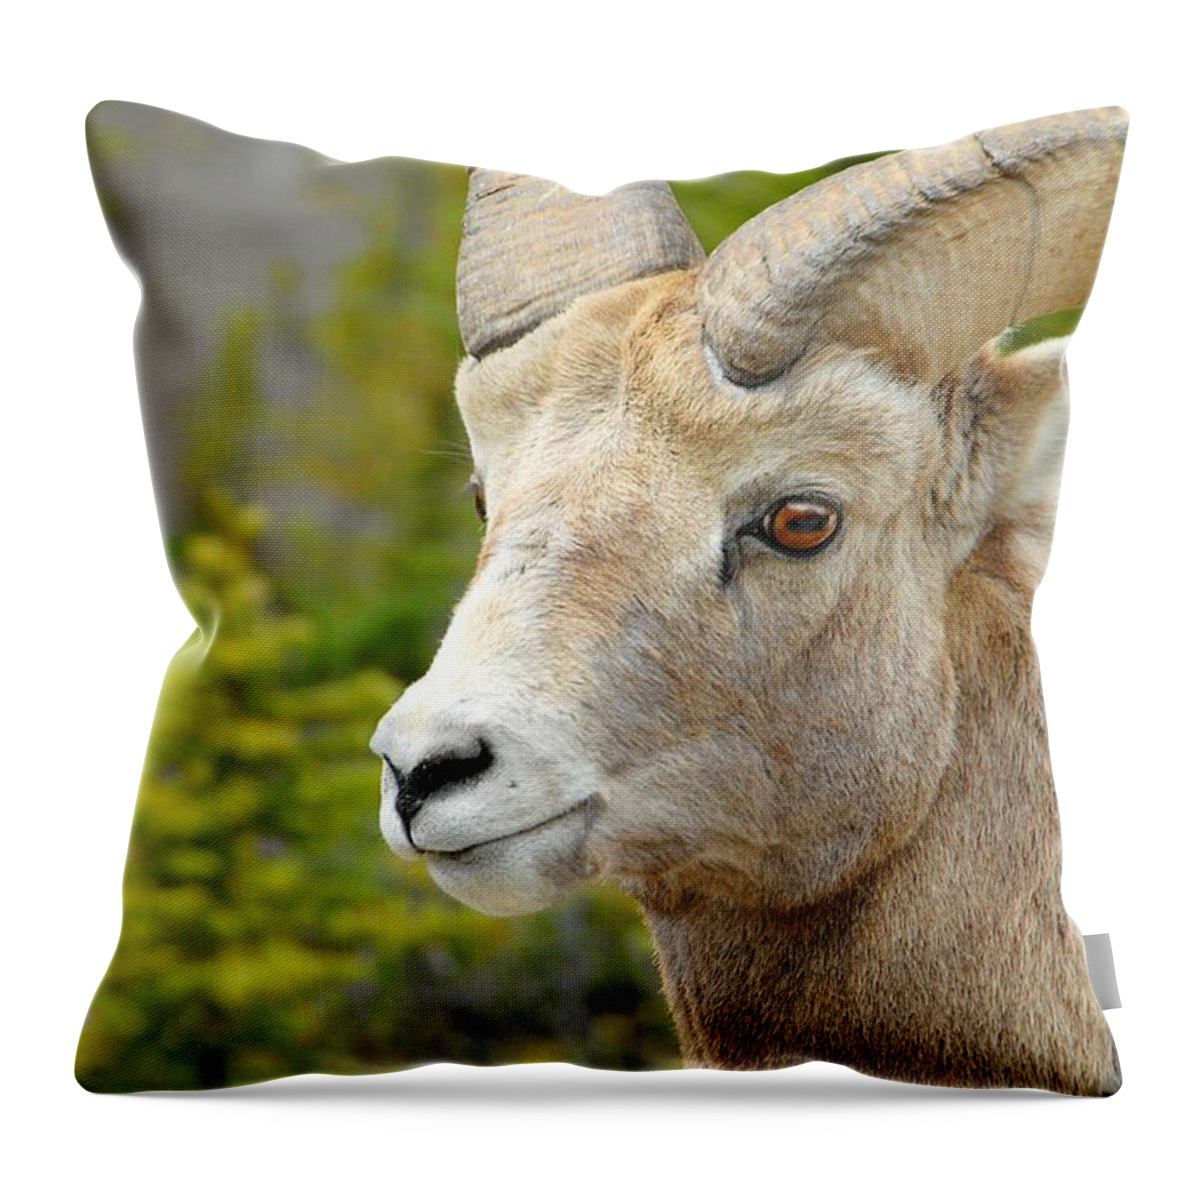 Banff Throw Pillow featuring the photograph The Magnificent Big Horn Ram by Dyle  Warren